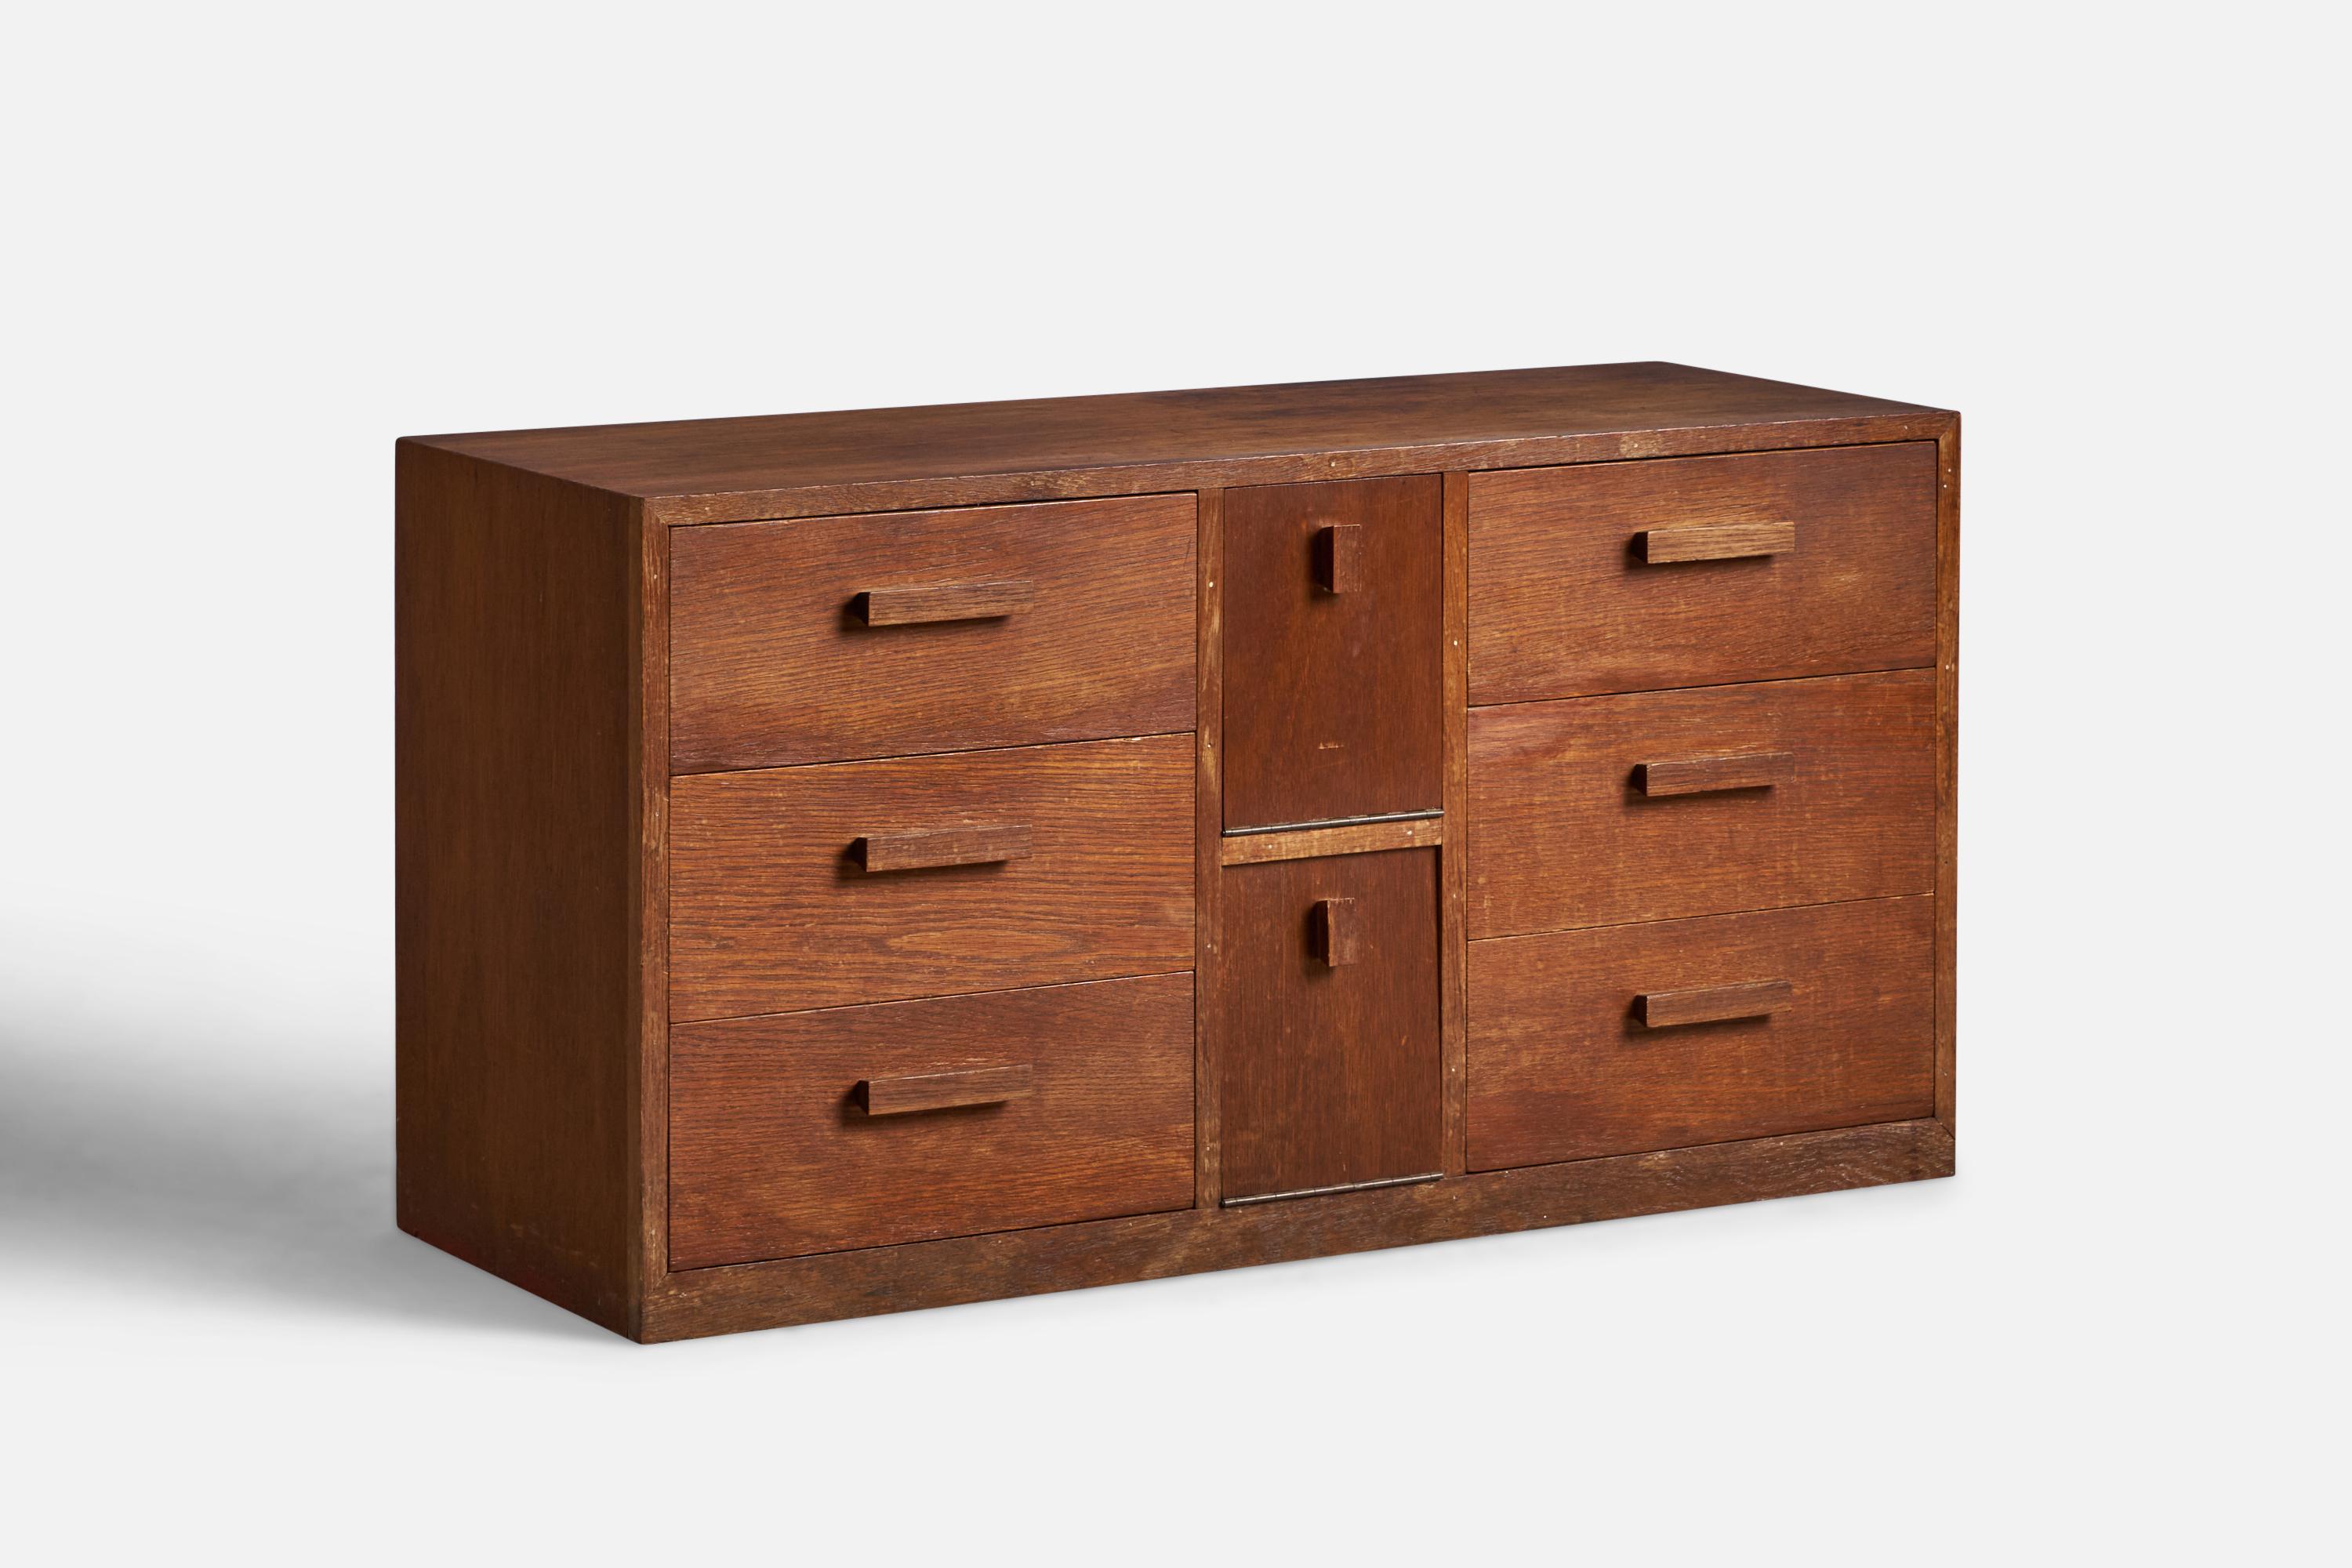 A dark-stained oak dresser designed and produced in the US, 1940s.